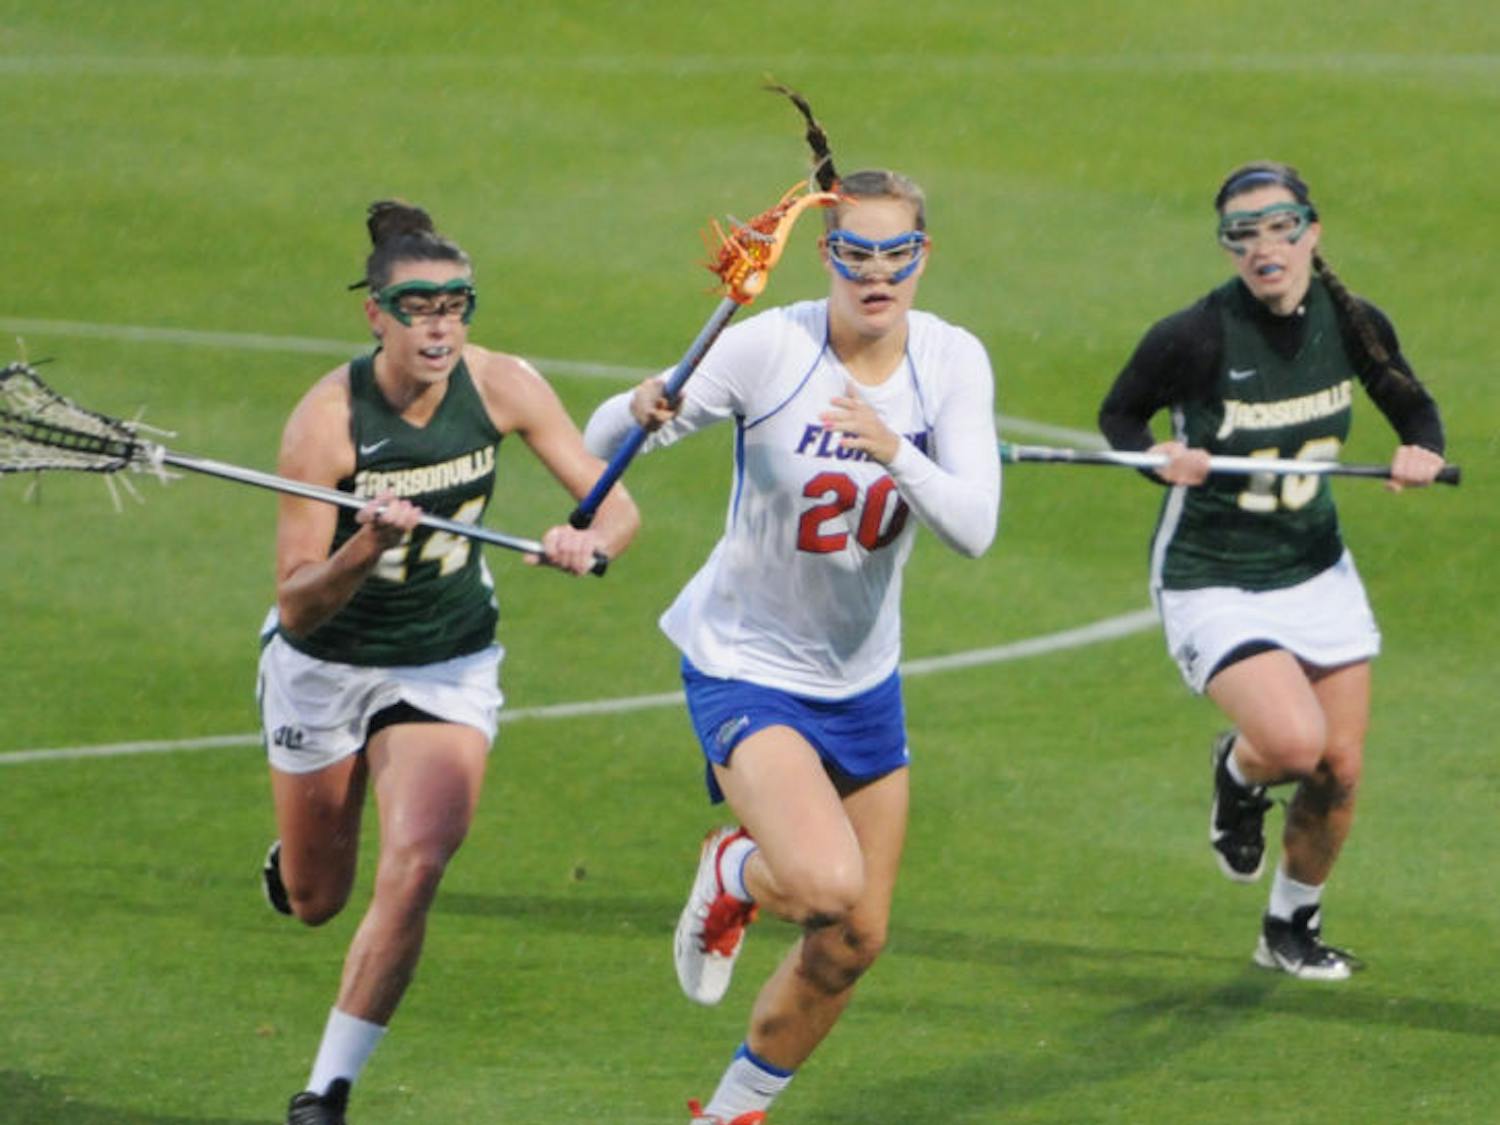 Devon Schneider drives toward the net during Florida’s 21-5 win against Jacksonville on Wednesday at Donald R. Dizney Stadium. Schneider scored four points against the Dolphins after she was held scoreless against the Tar Heels in the Gators’ 20-8 season-opening loss on Feb. 8.